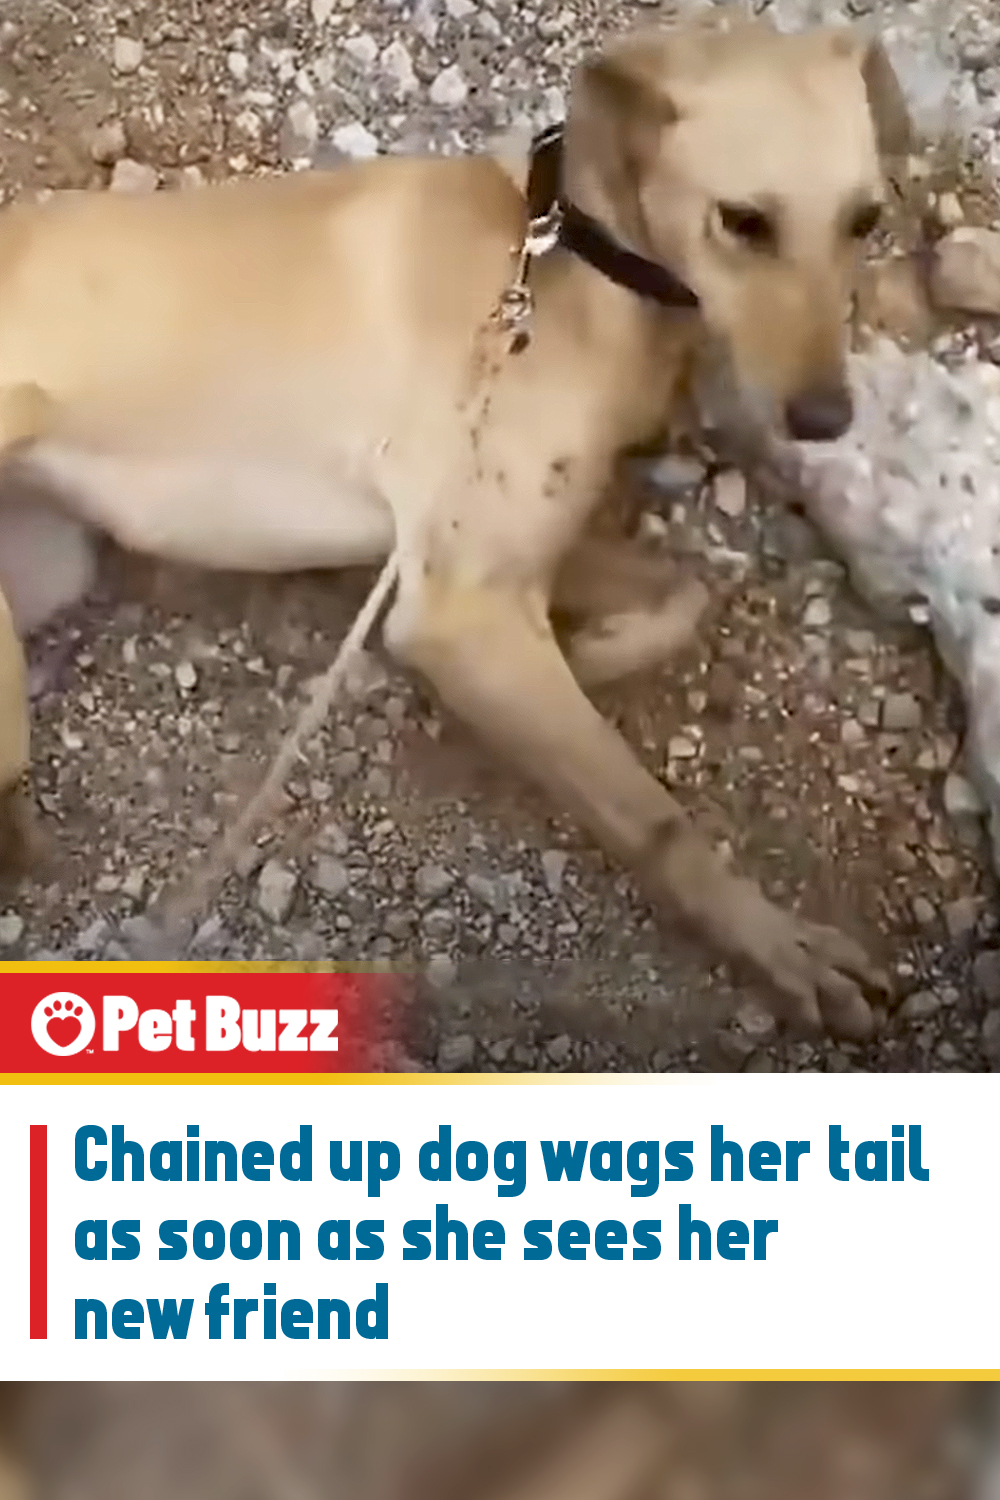 Chained up dog wags her tail as soon as she sees her new friend